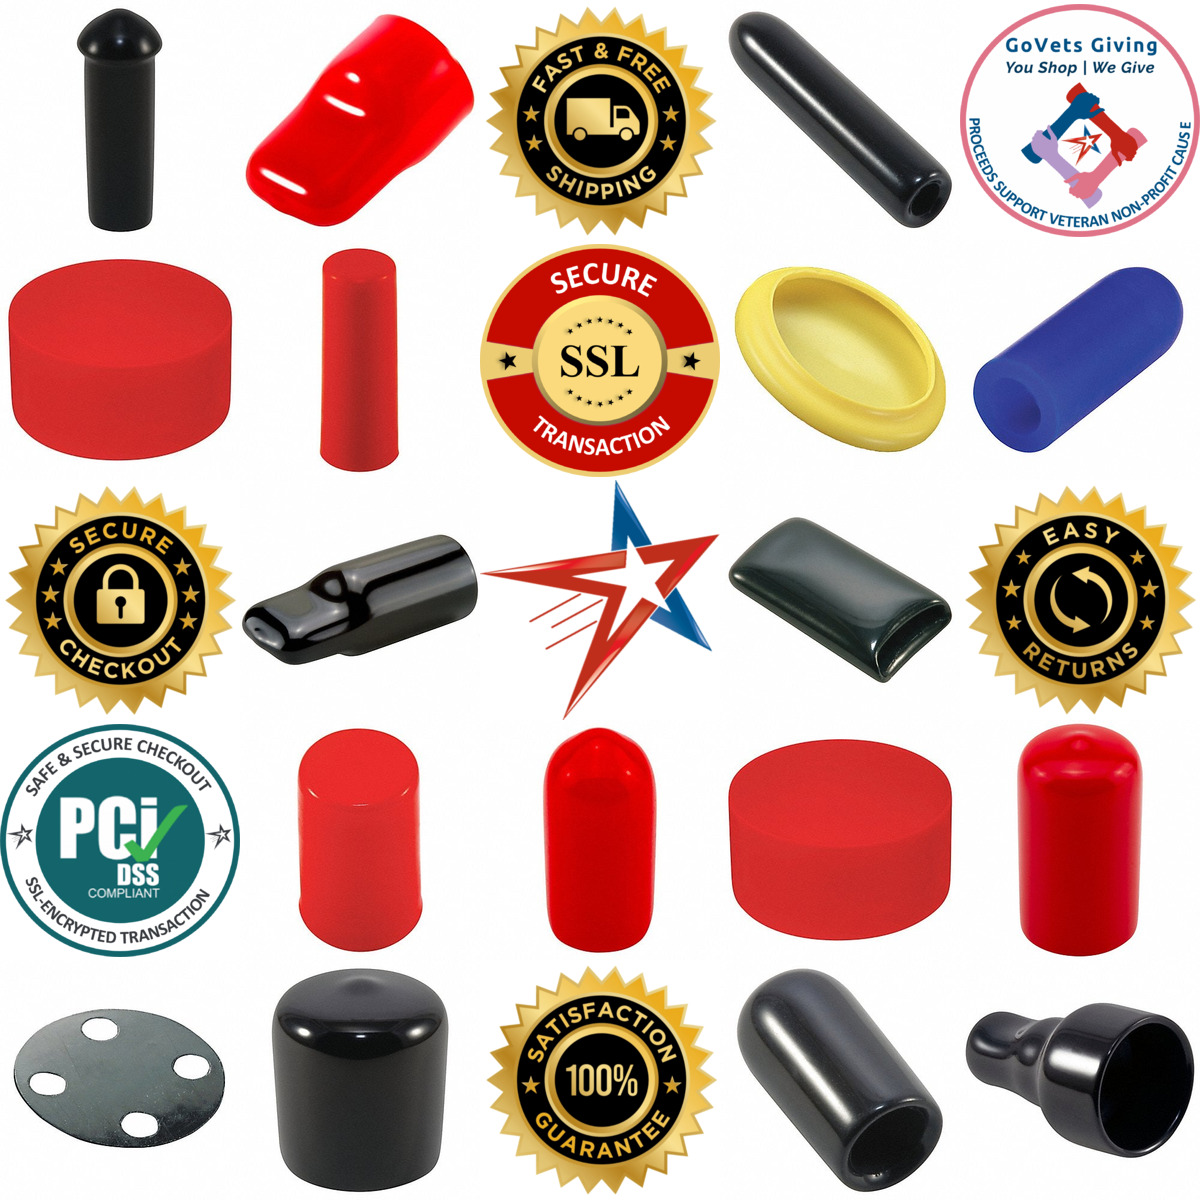 A selection of Straight Sided Caps products on GoVets